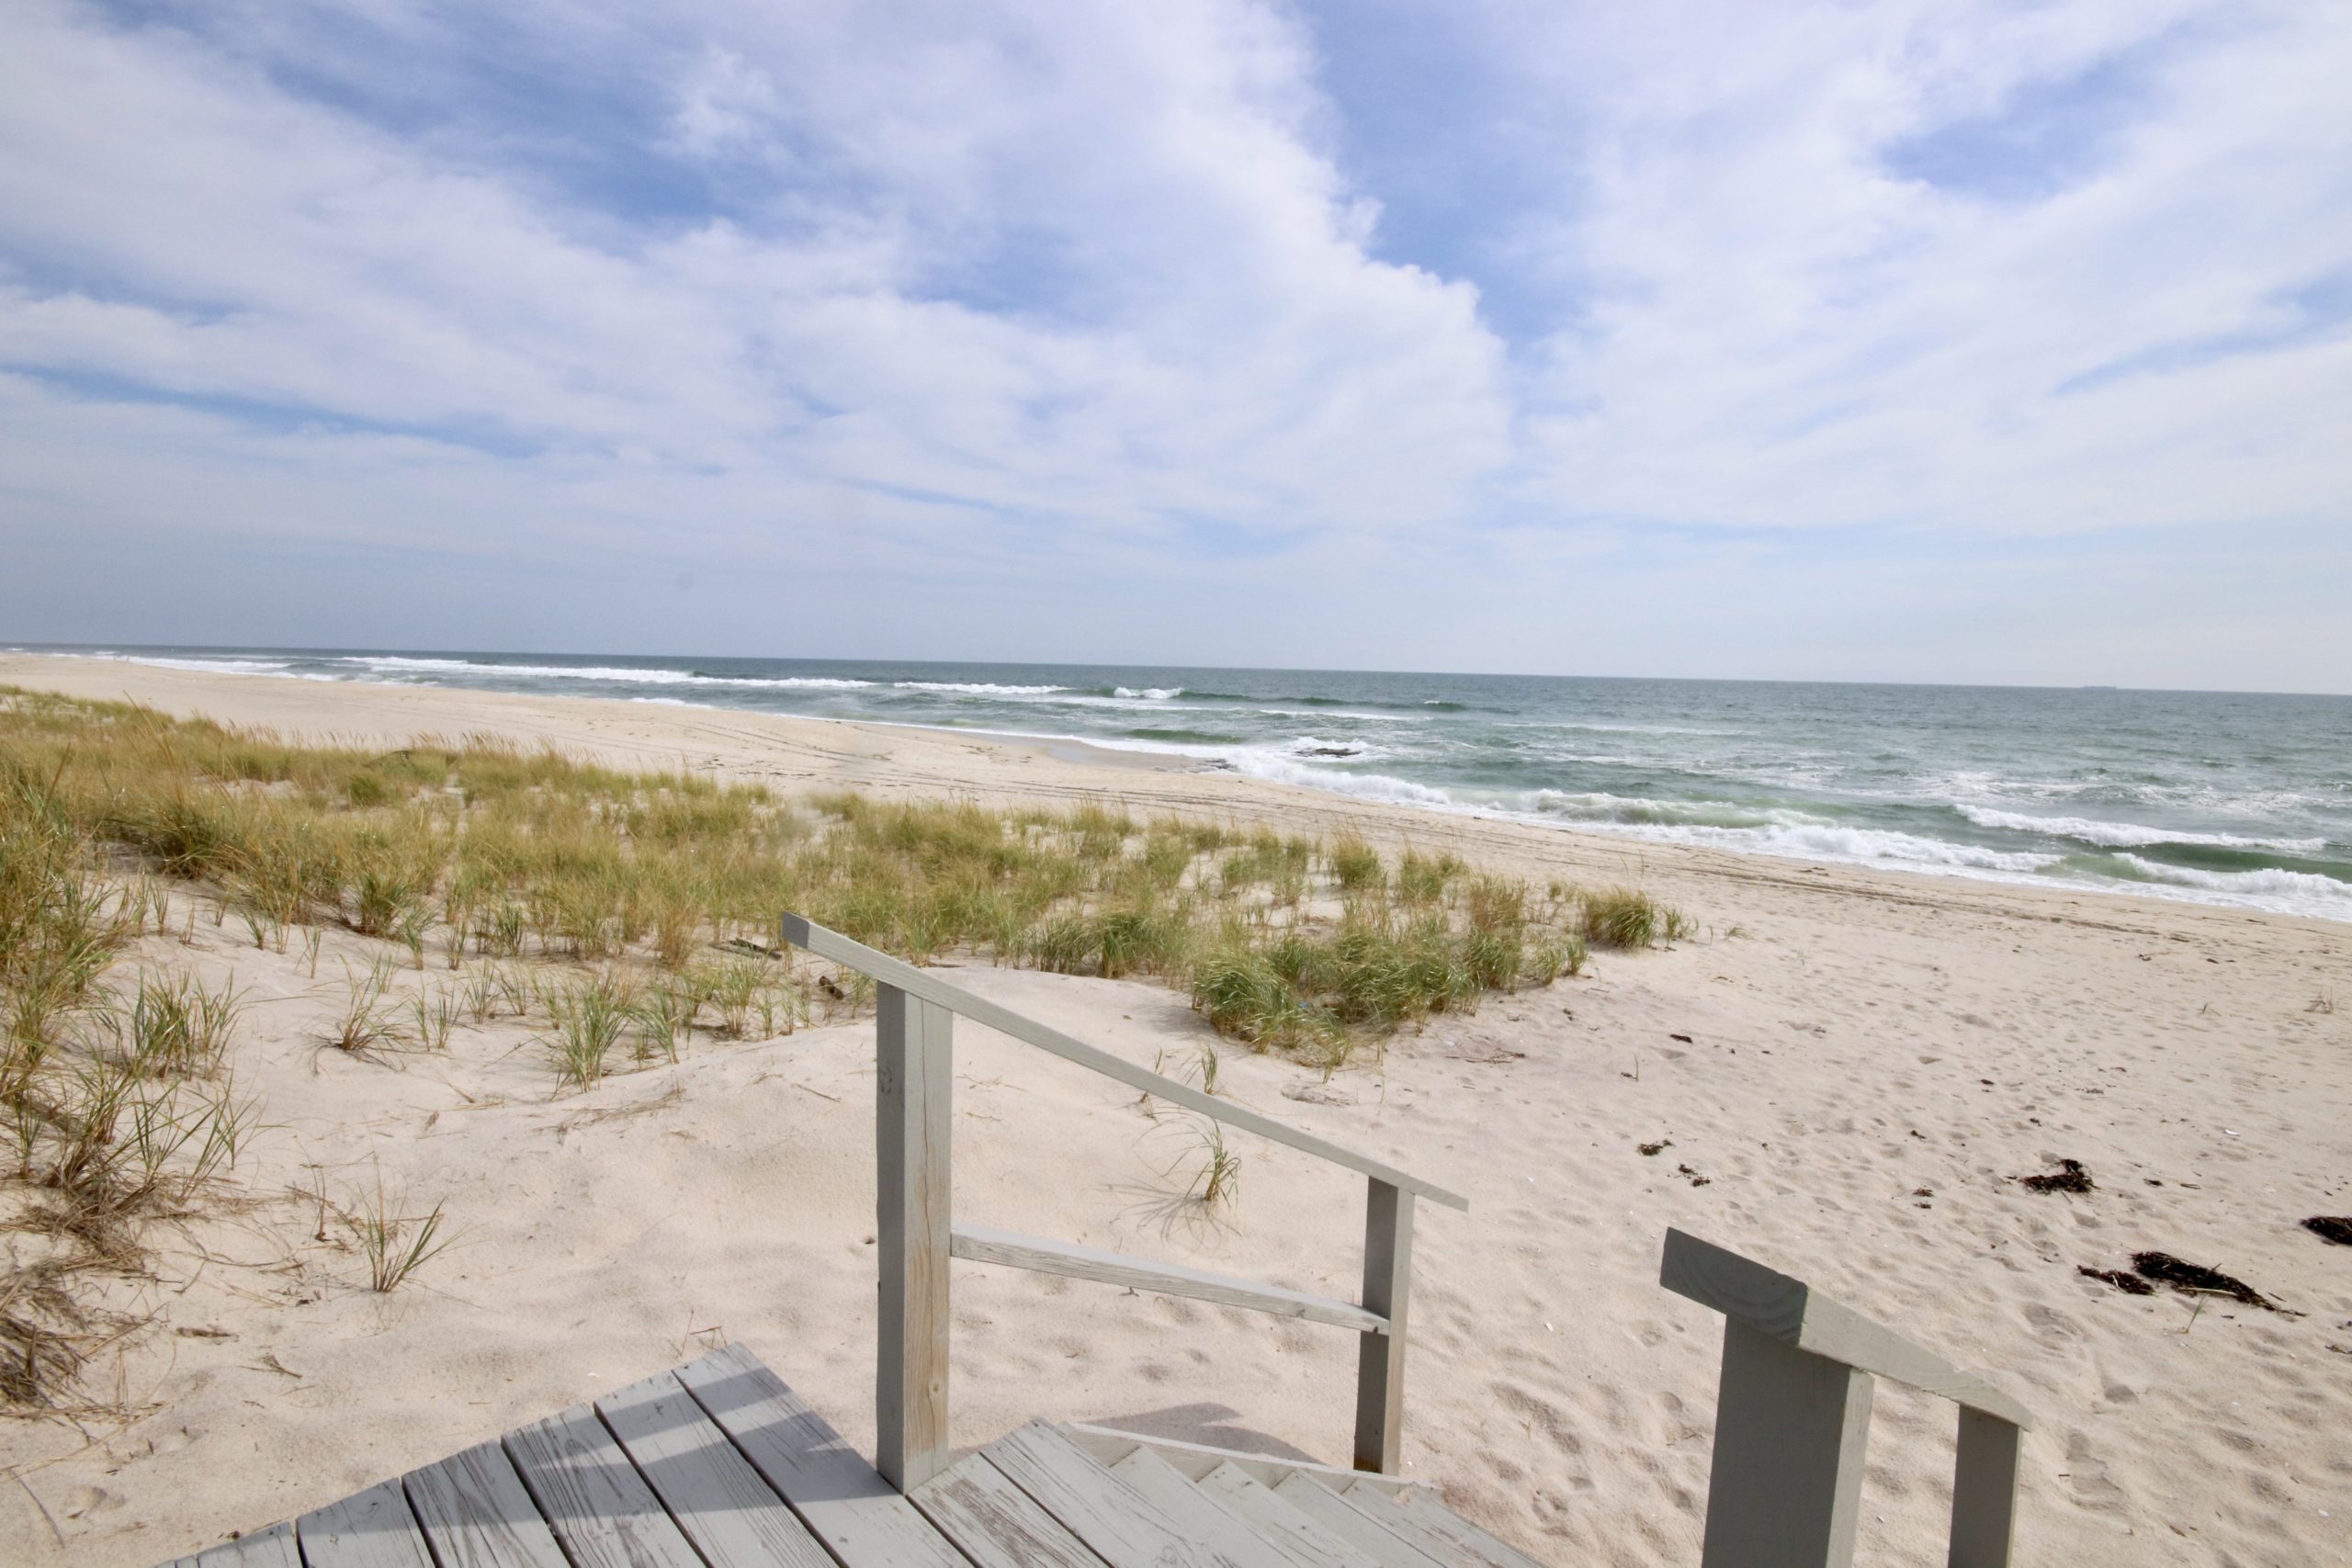 Sand Castle at 159 Dune Road in Quogue.